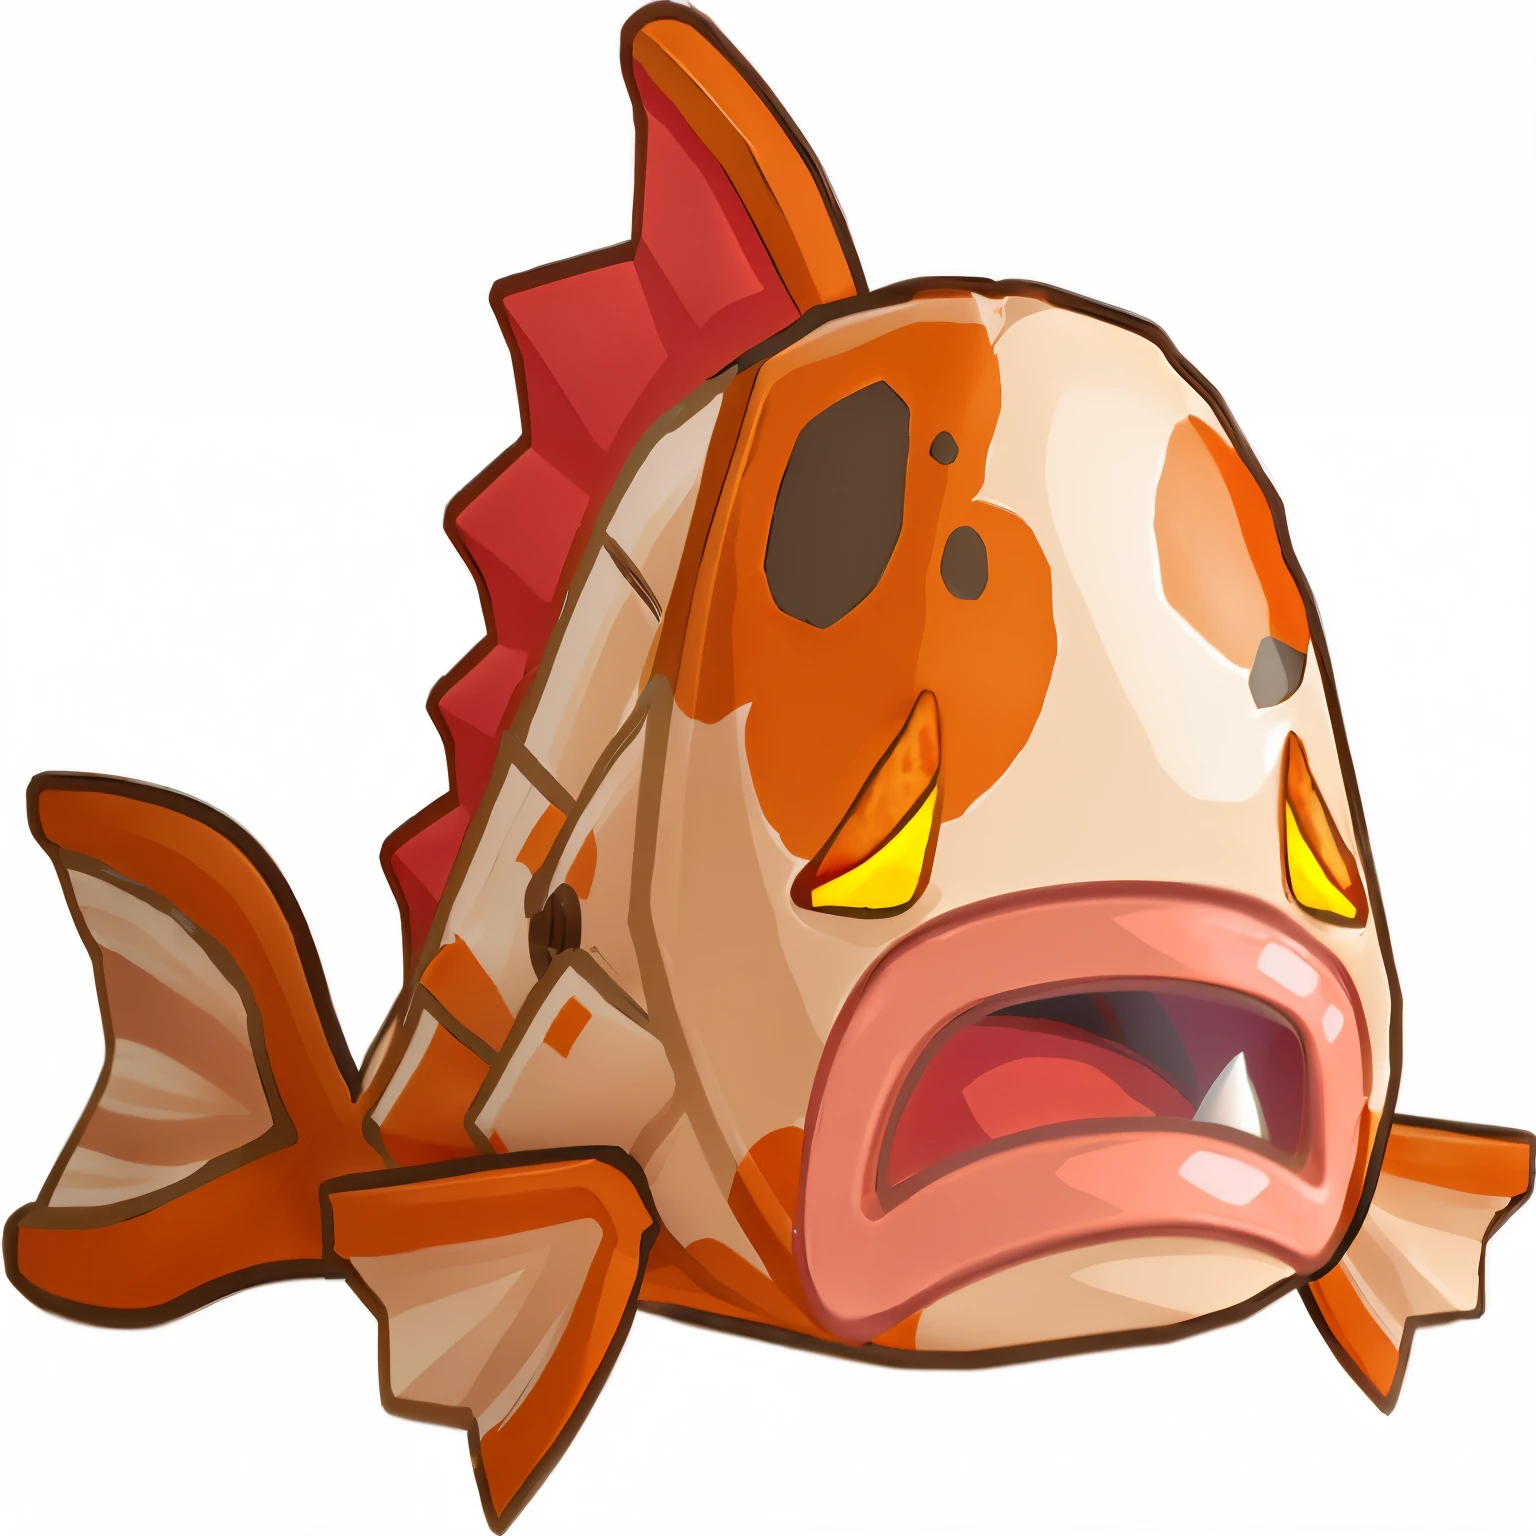 3d koi fish with a very angry look on its face, scary fish, fish